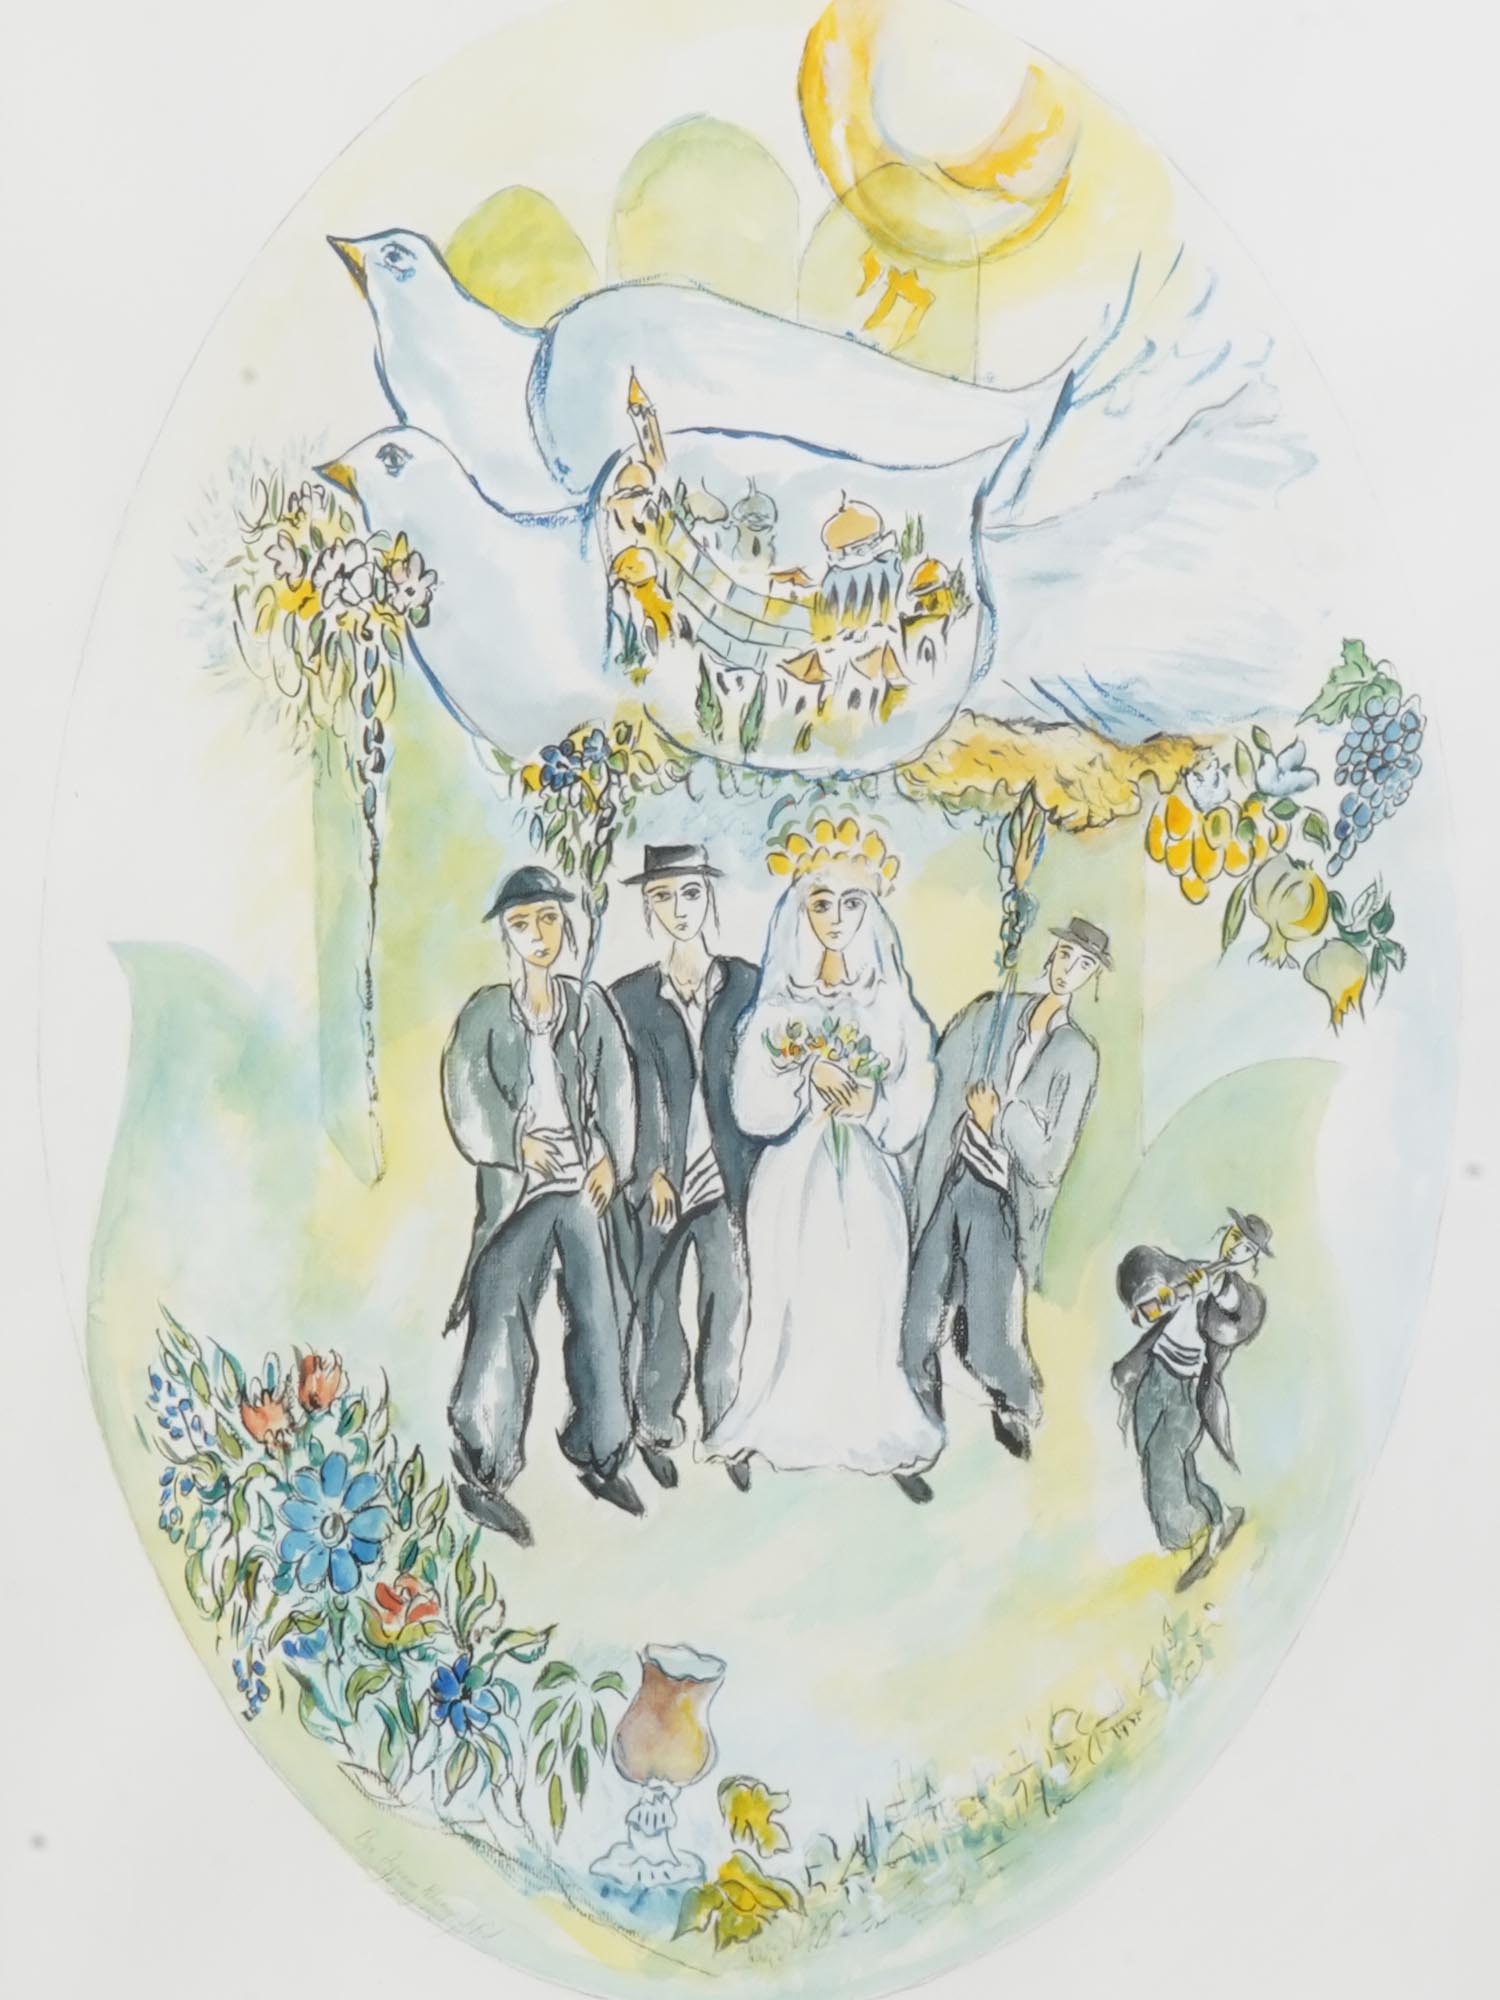 WATERCOLOR PAINTING JEWISH WEDDING BY BEN AVRAM PIC-1